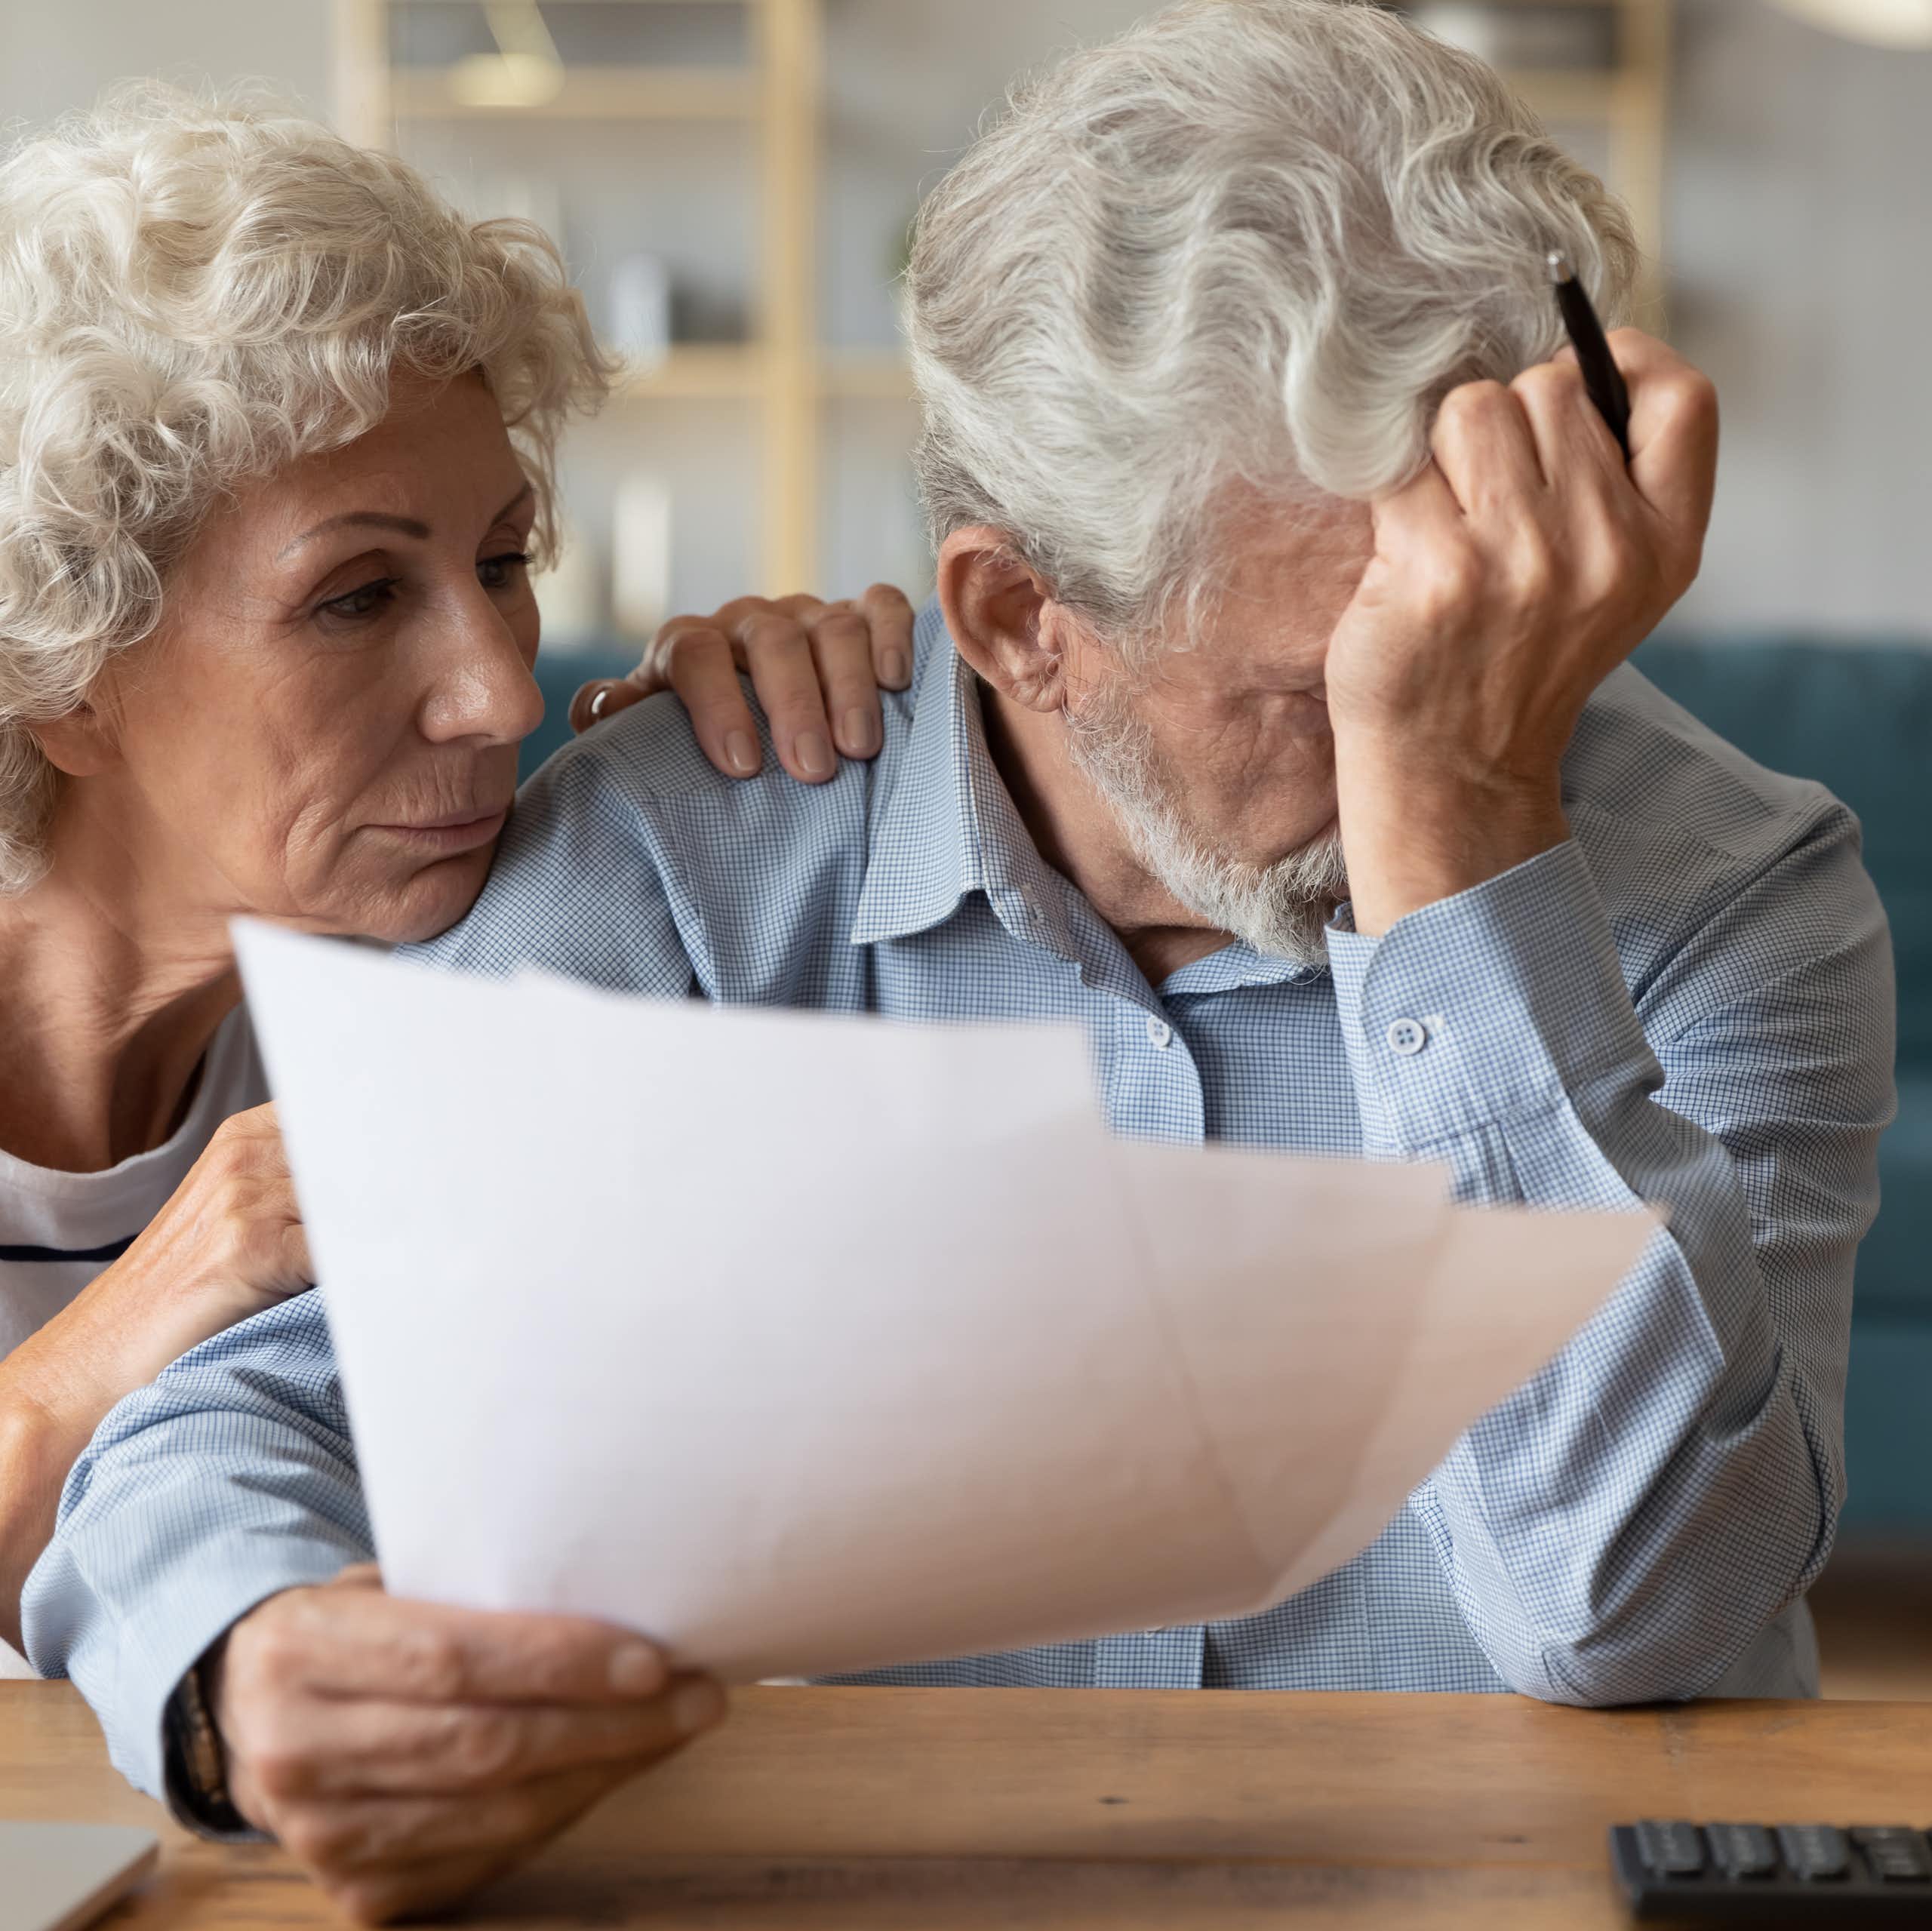 An older man holding a piece of paper and sadly resting his forehead on his hand while his wife, next to him, comforts him. There is a calculator on the table.